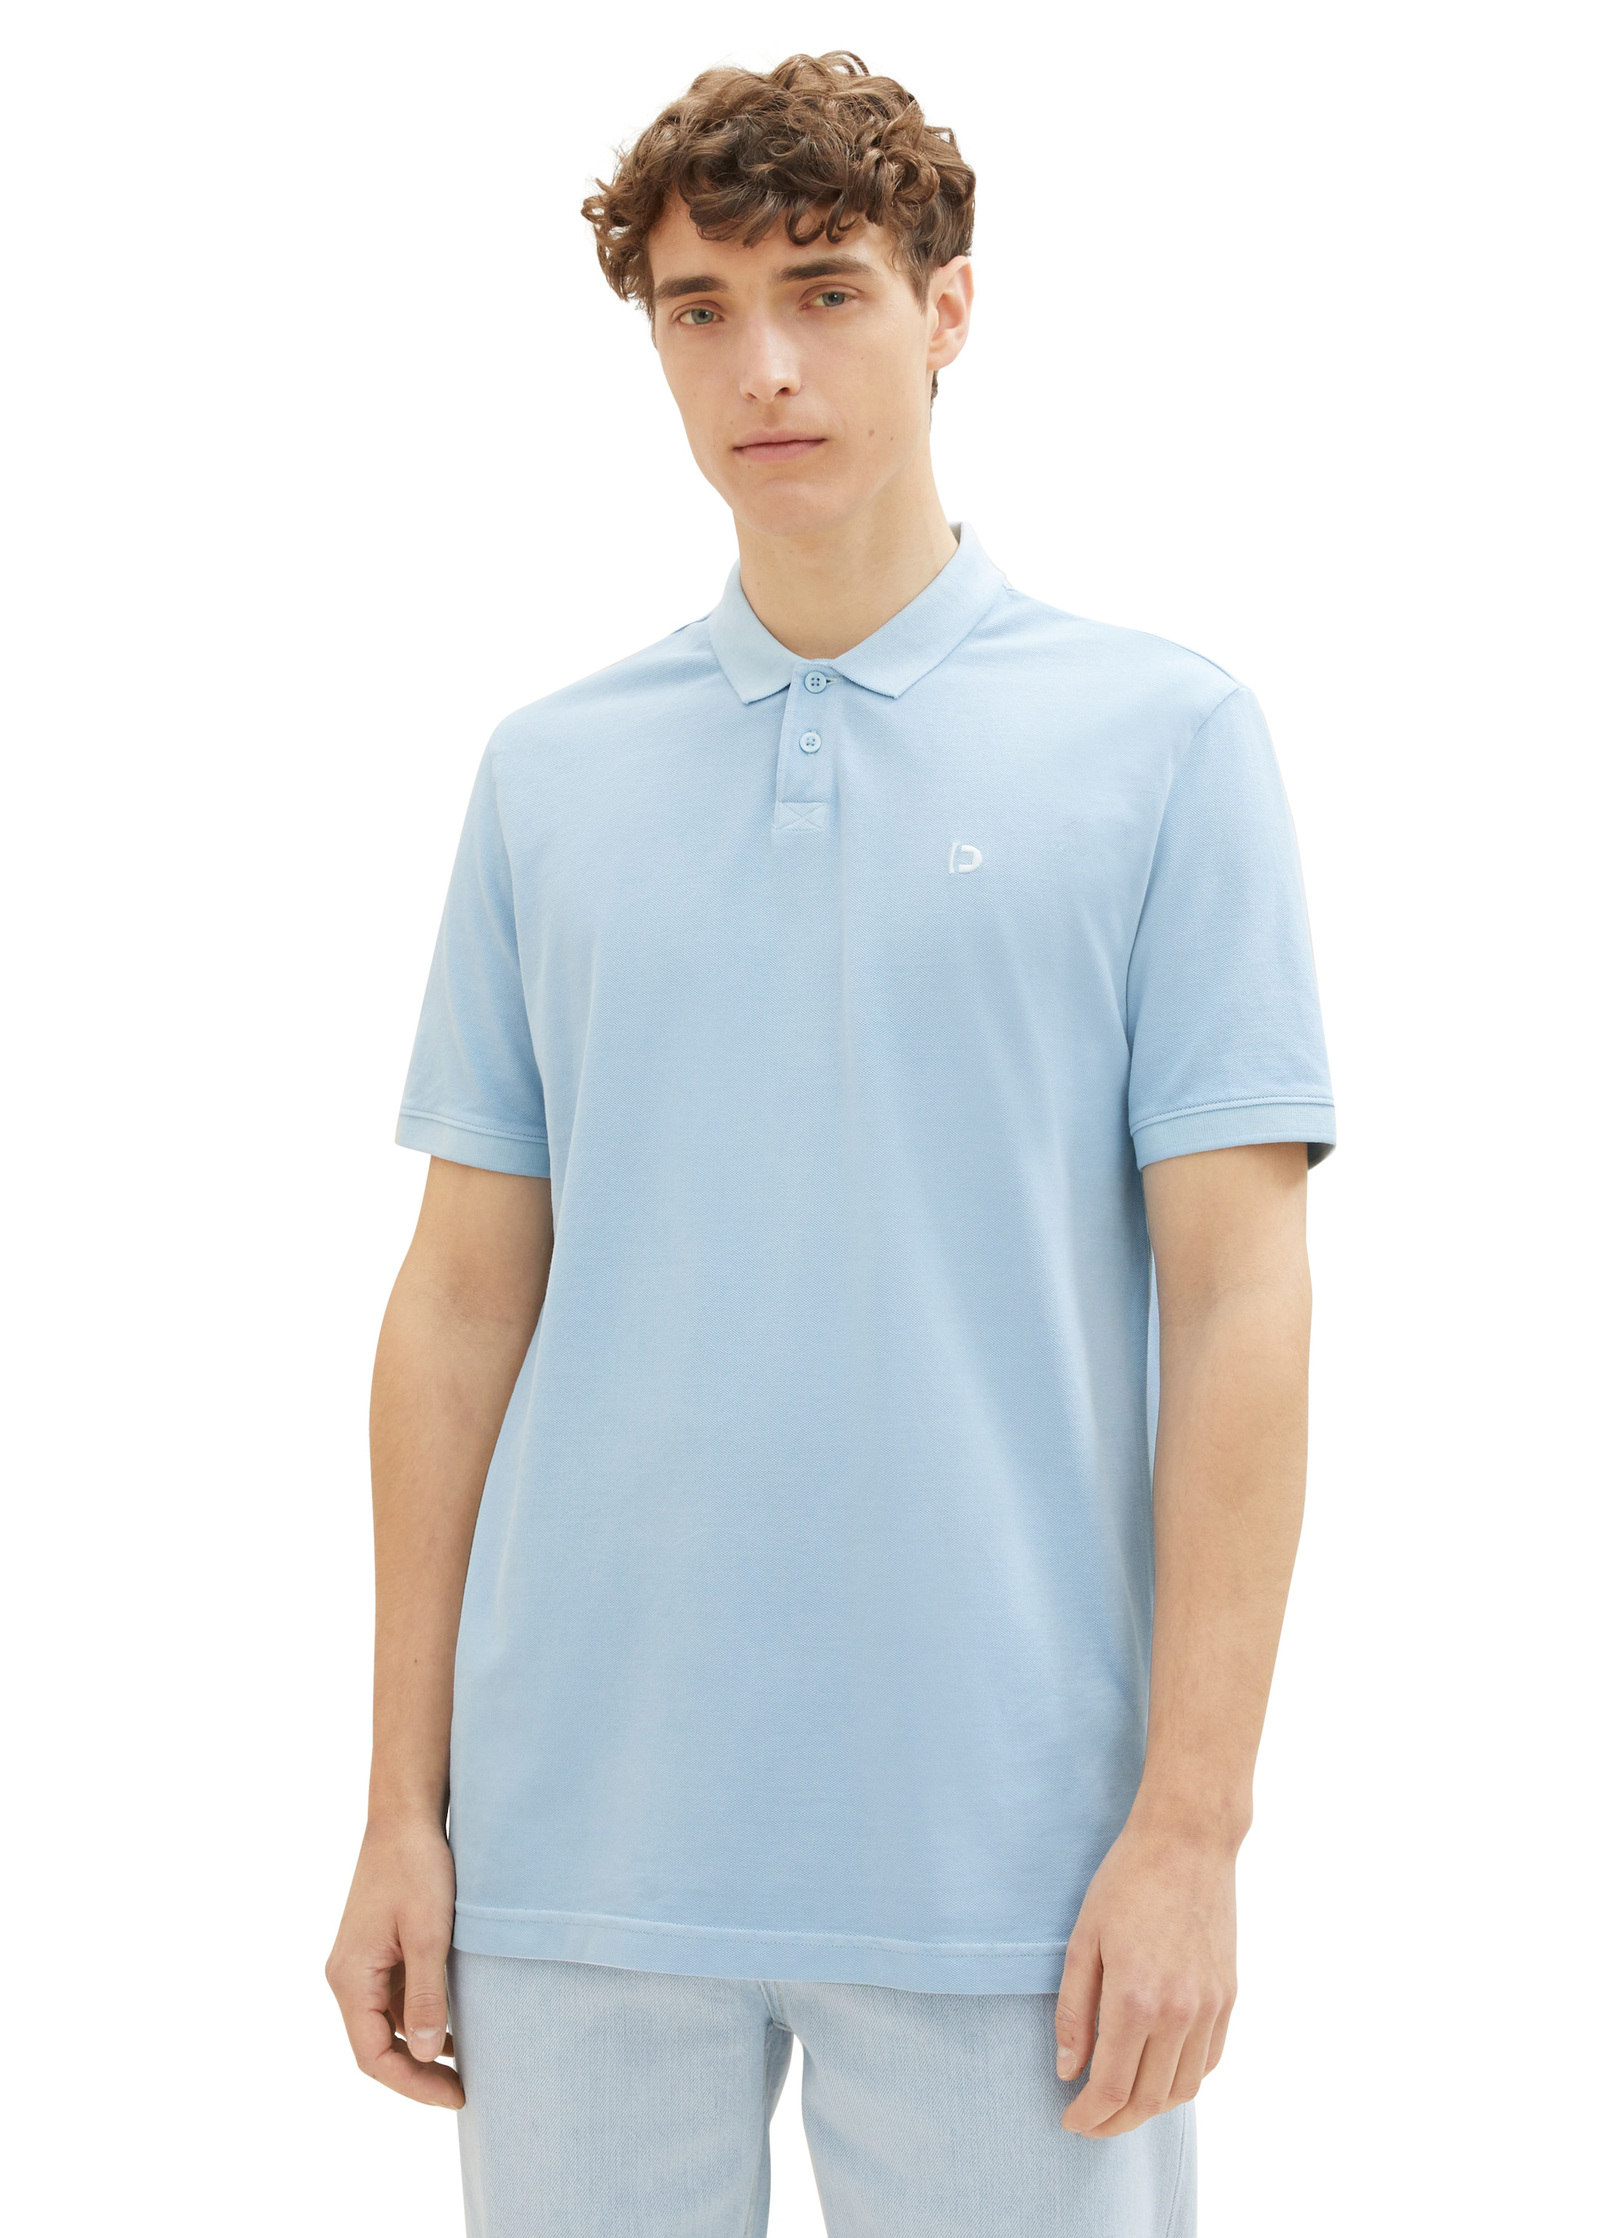 Denim Tom Tailor® Polo Tee - Washed Out Middle Blue Größe XXL